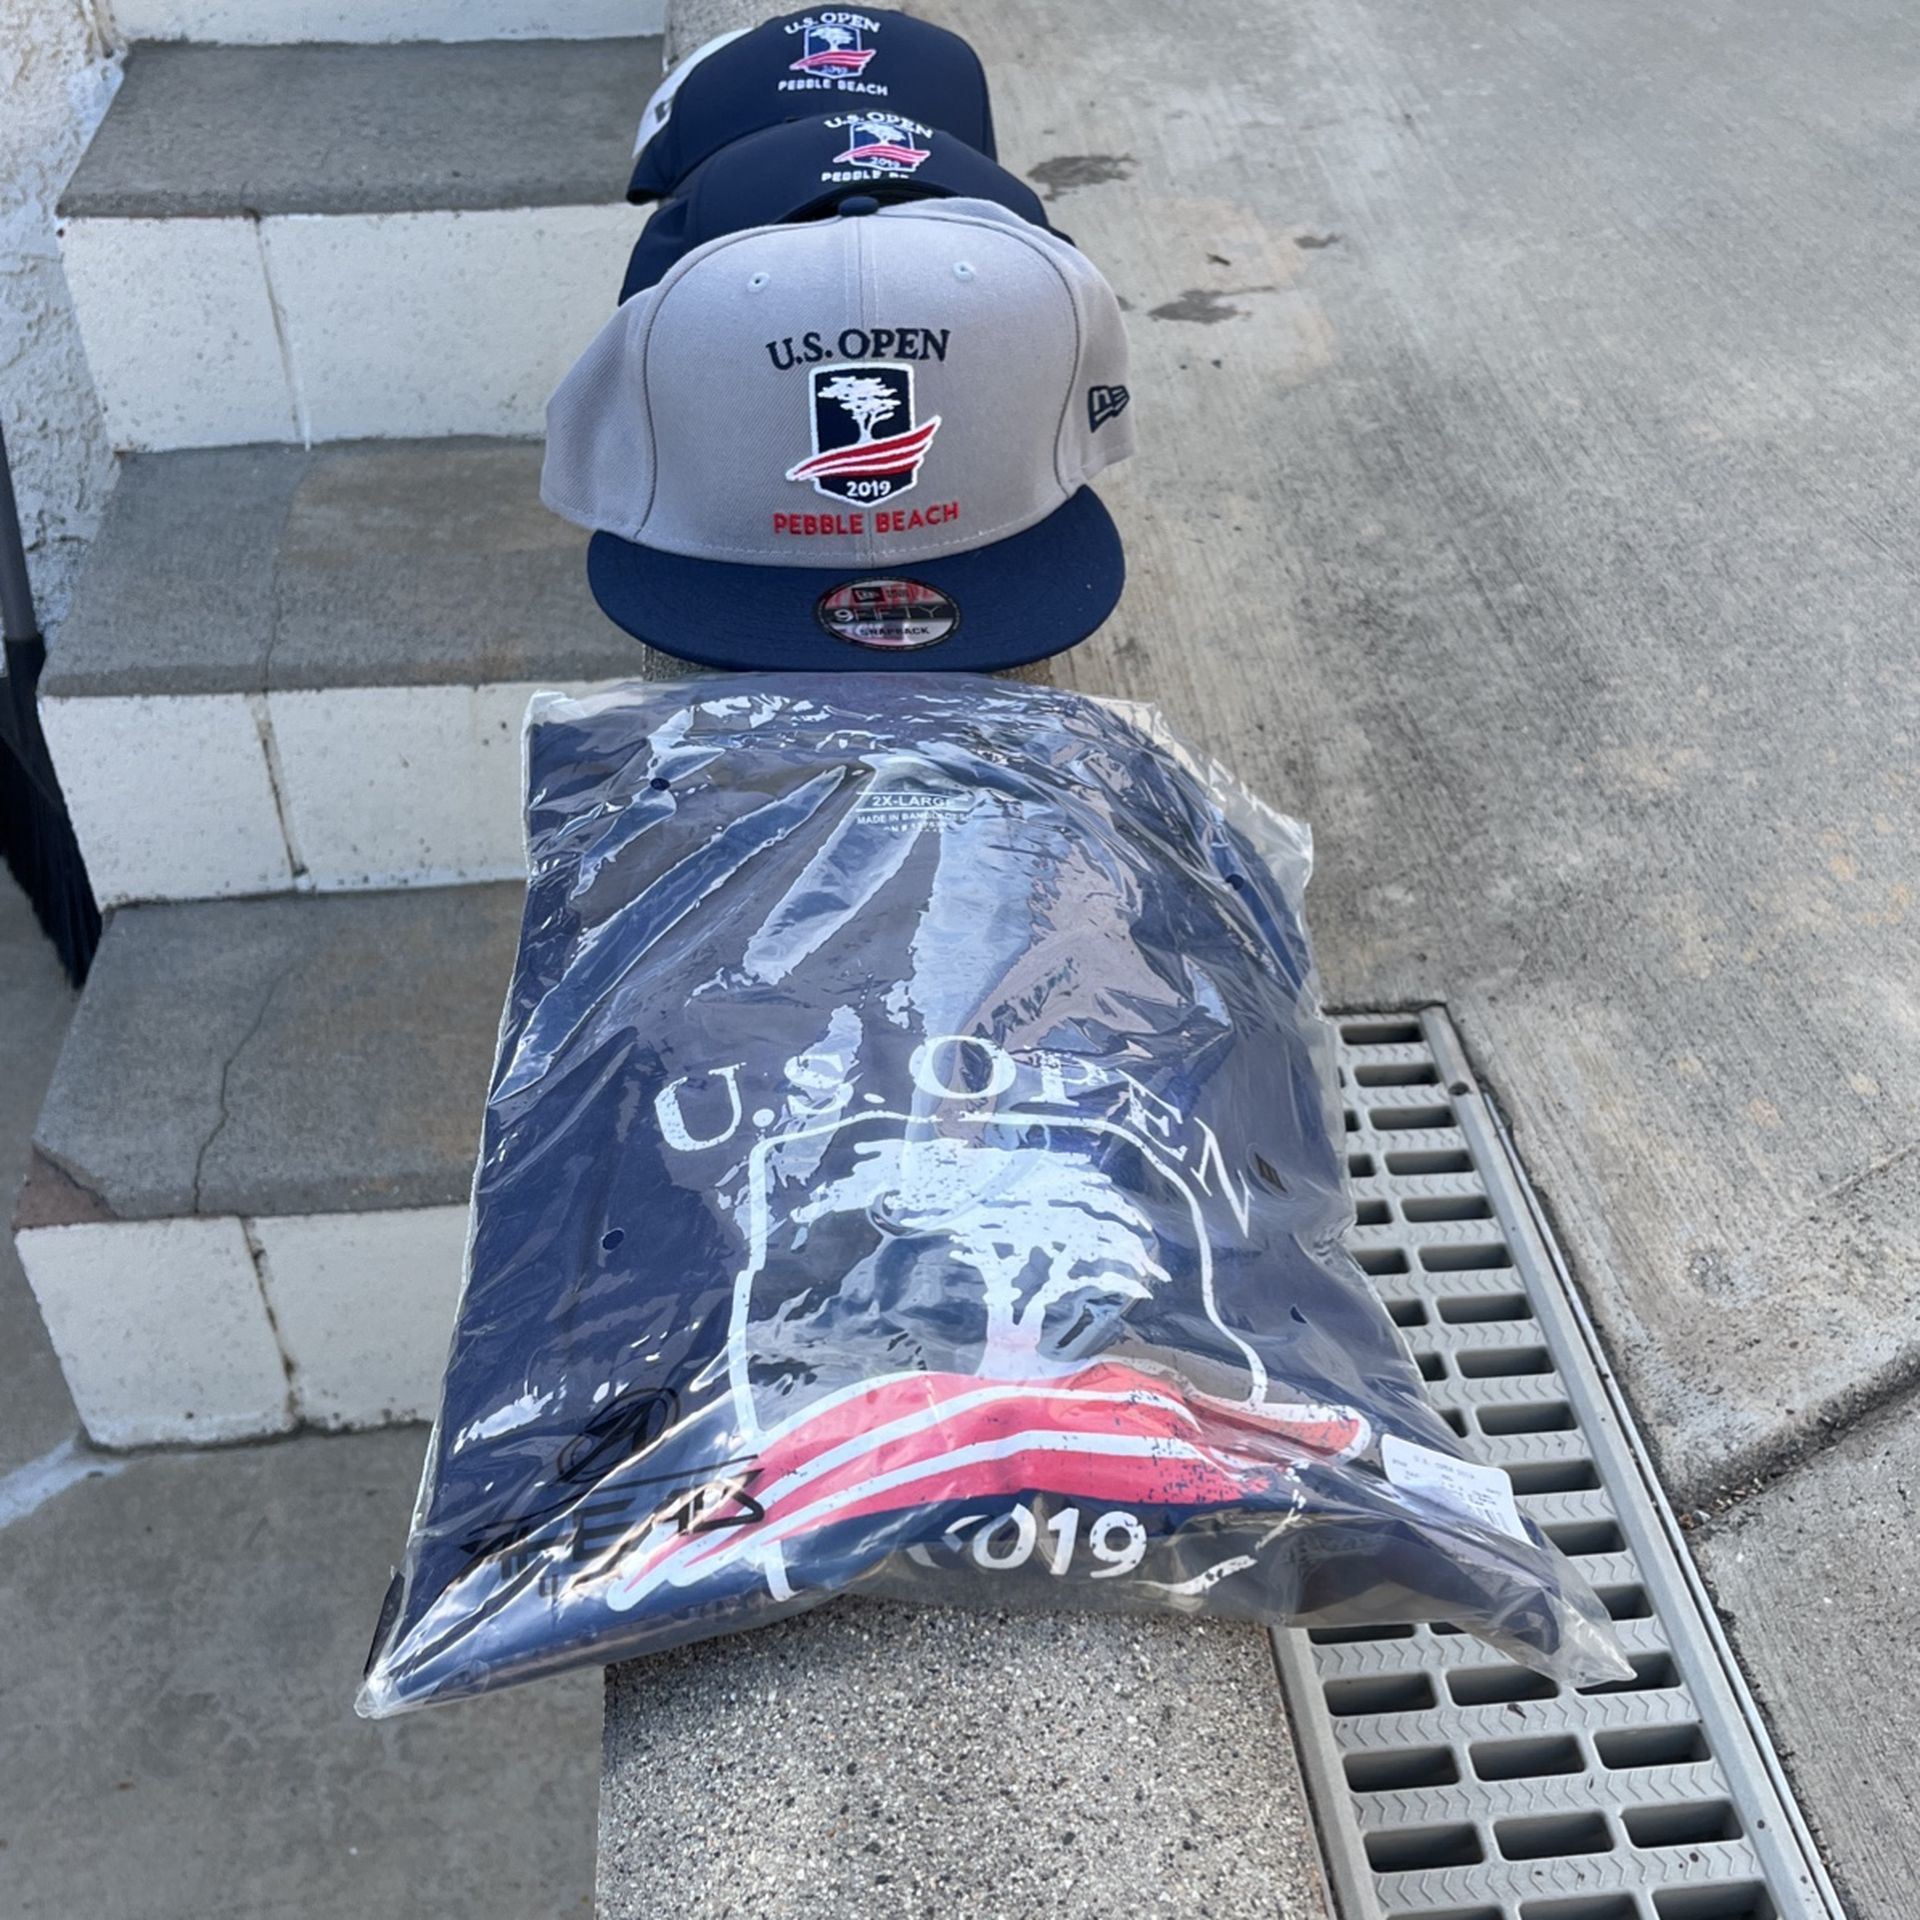 2019 US Open Golf Pebble Beach 1T-shirt/1 Hat = $30, 1 Tee/2 Hats = $40, All 4 For $50 NEW! 2 Hats Are Unisex